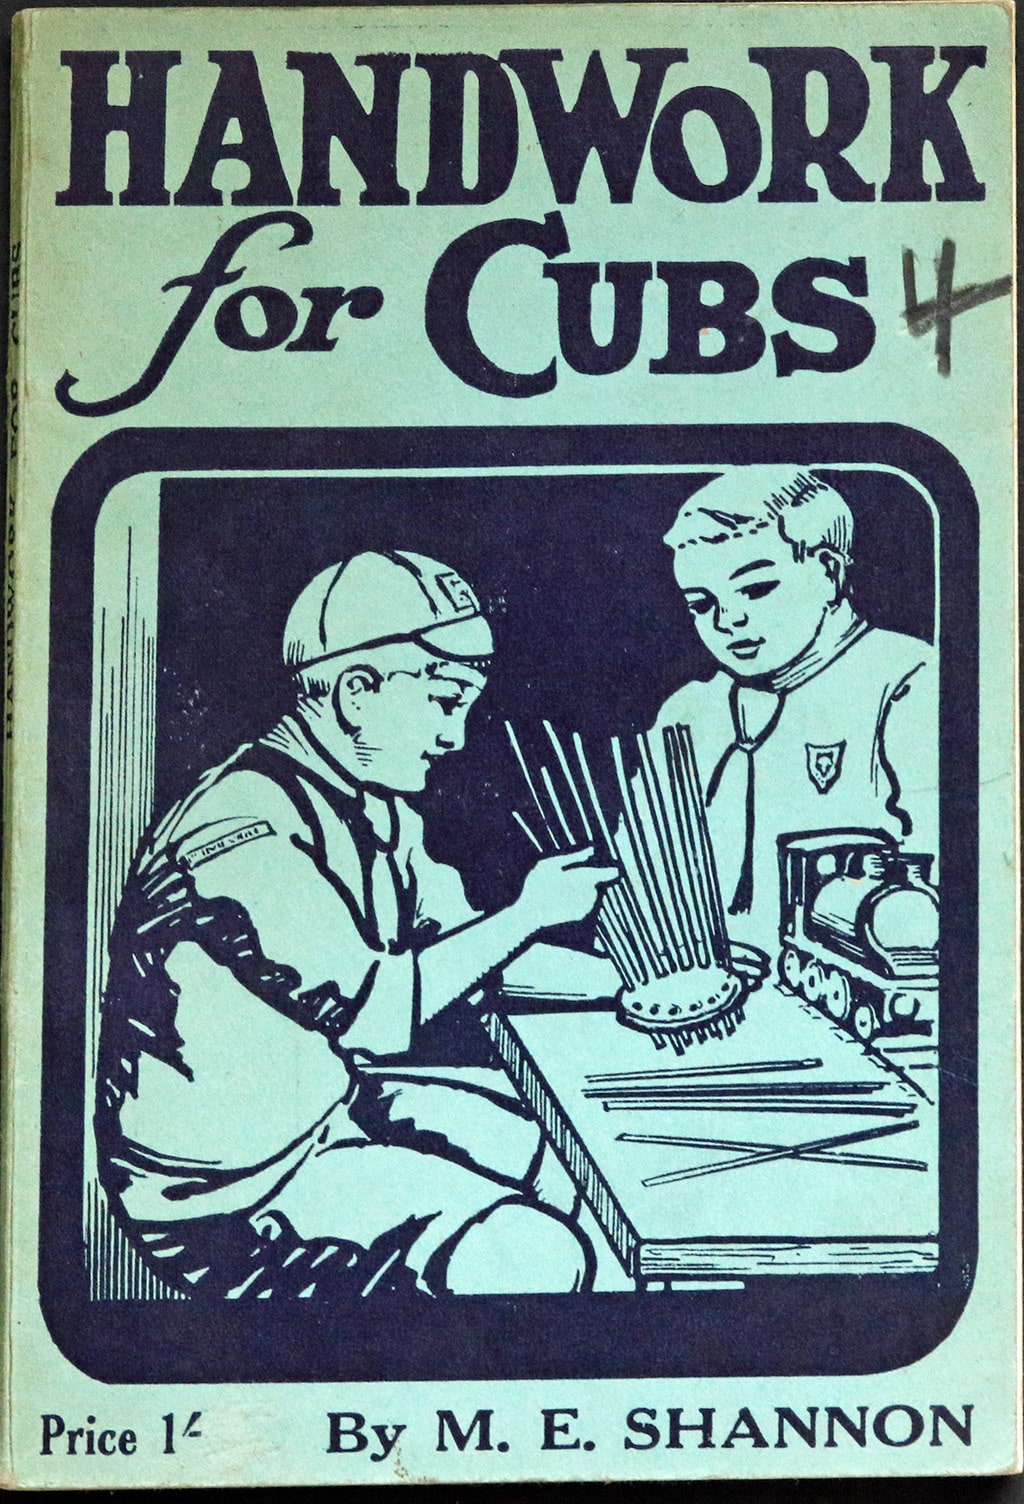 Handwork for Cubs front cover. Author is M E Shannon. The illustration on the cover shows two boys in cubs uniforms making something with long sticks.